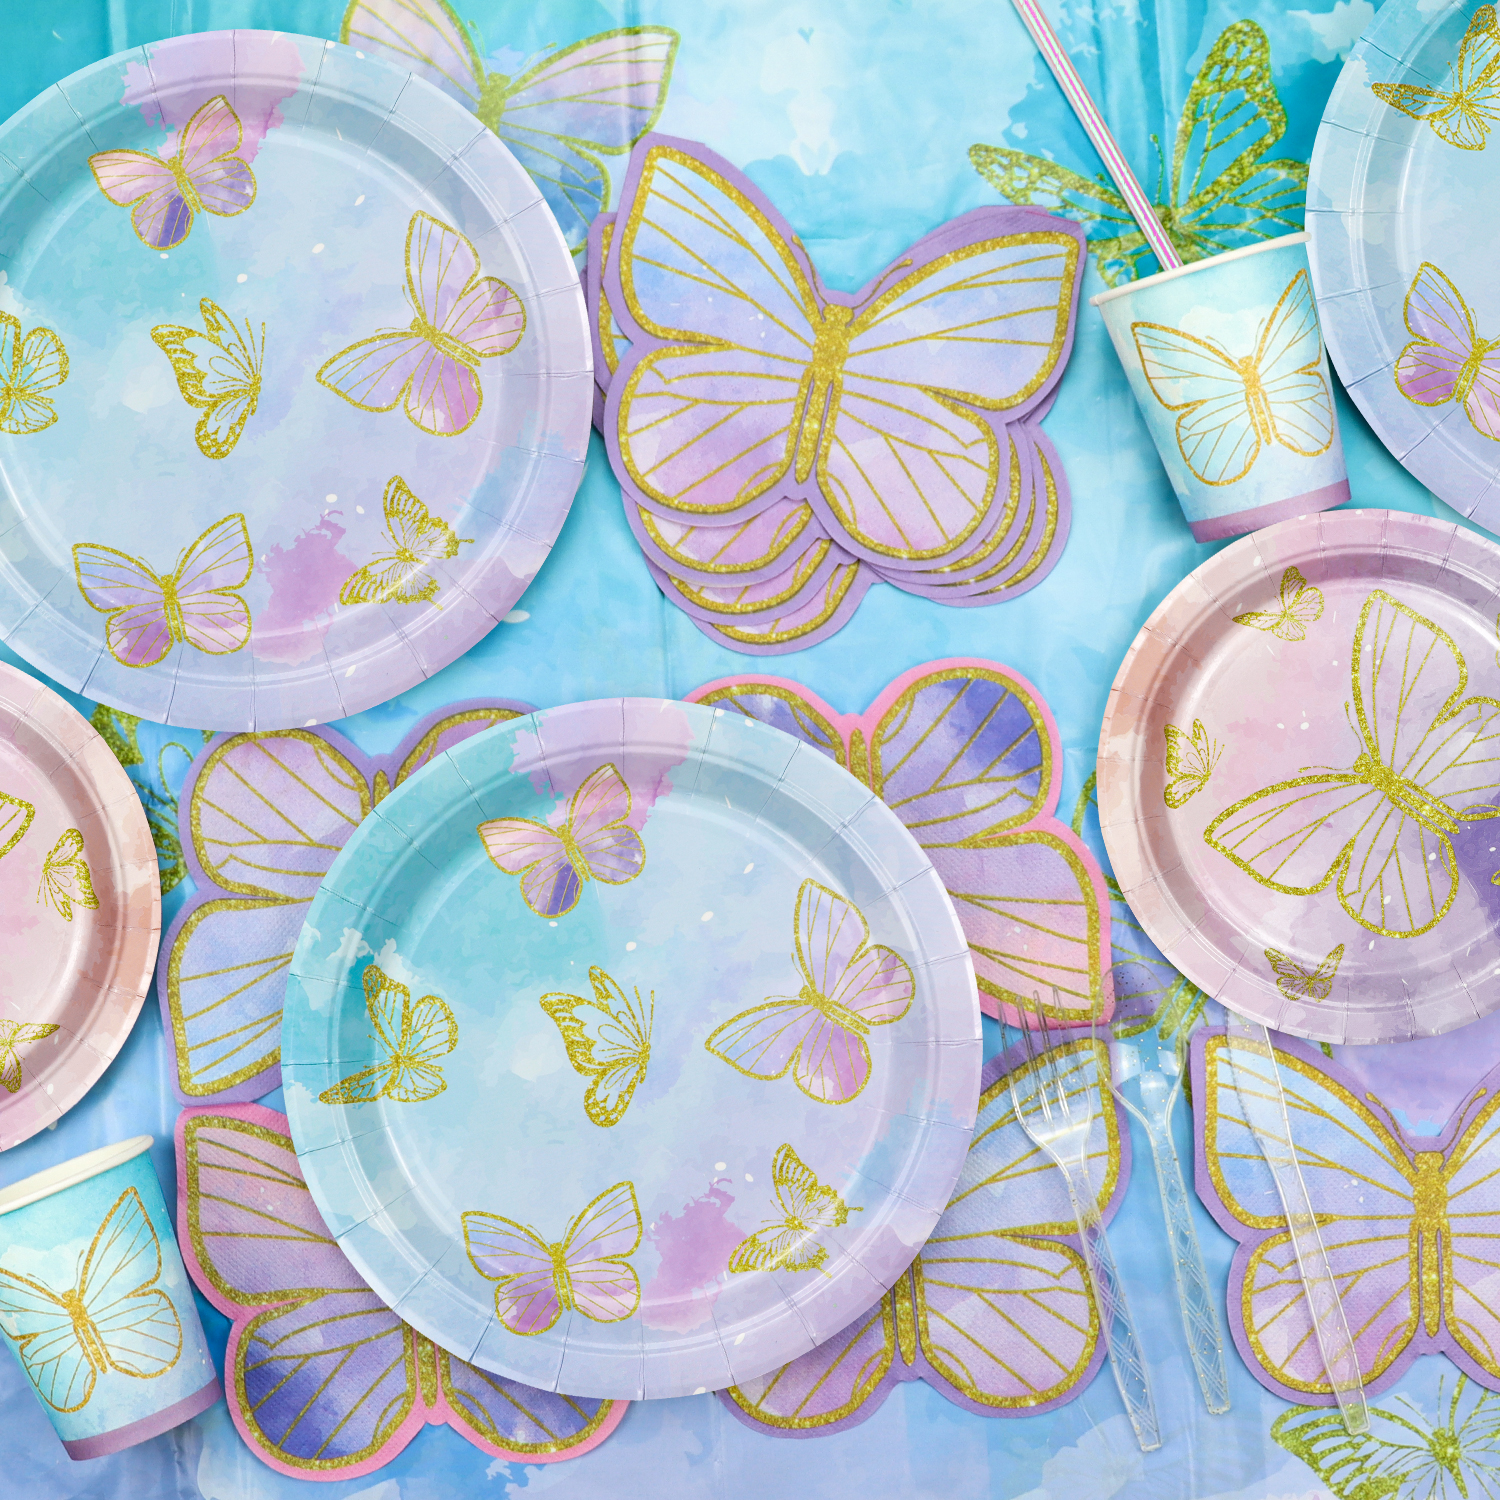 256 Pcs Butterfly Party Decorations - Including Plates, Tablecloth, Balloons, Banner, Butterfly Stickers, Cups, Butterfly Wing Set for Butterfly Birthday Decorations, Fairy Party Supplies - image 4 of 7